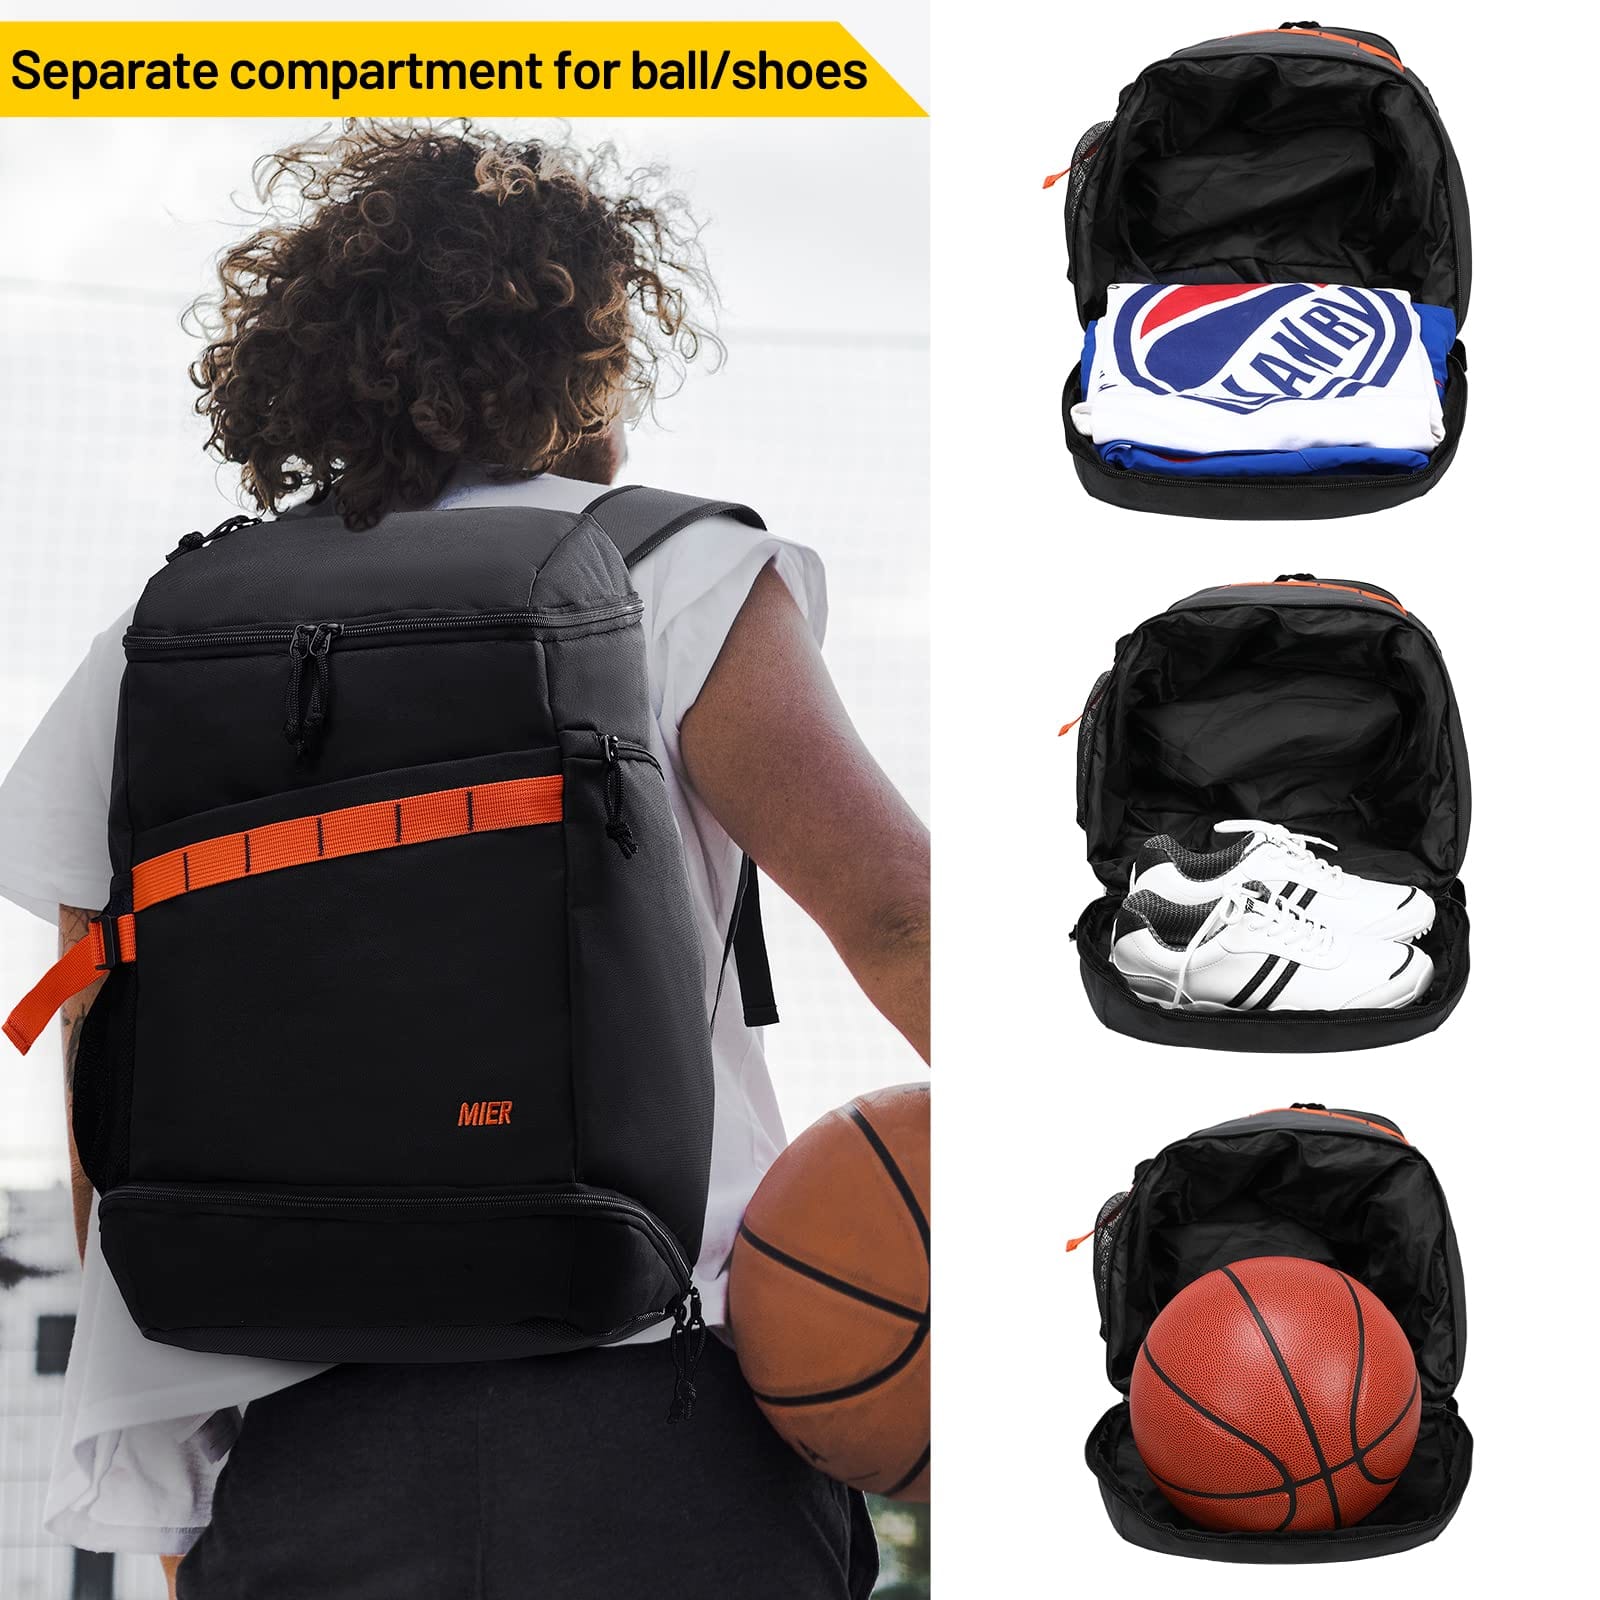 Basketball Backpack Soccer Bag with Shoes Ball Compartment Backpack Bag MIER